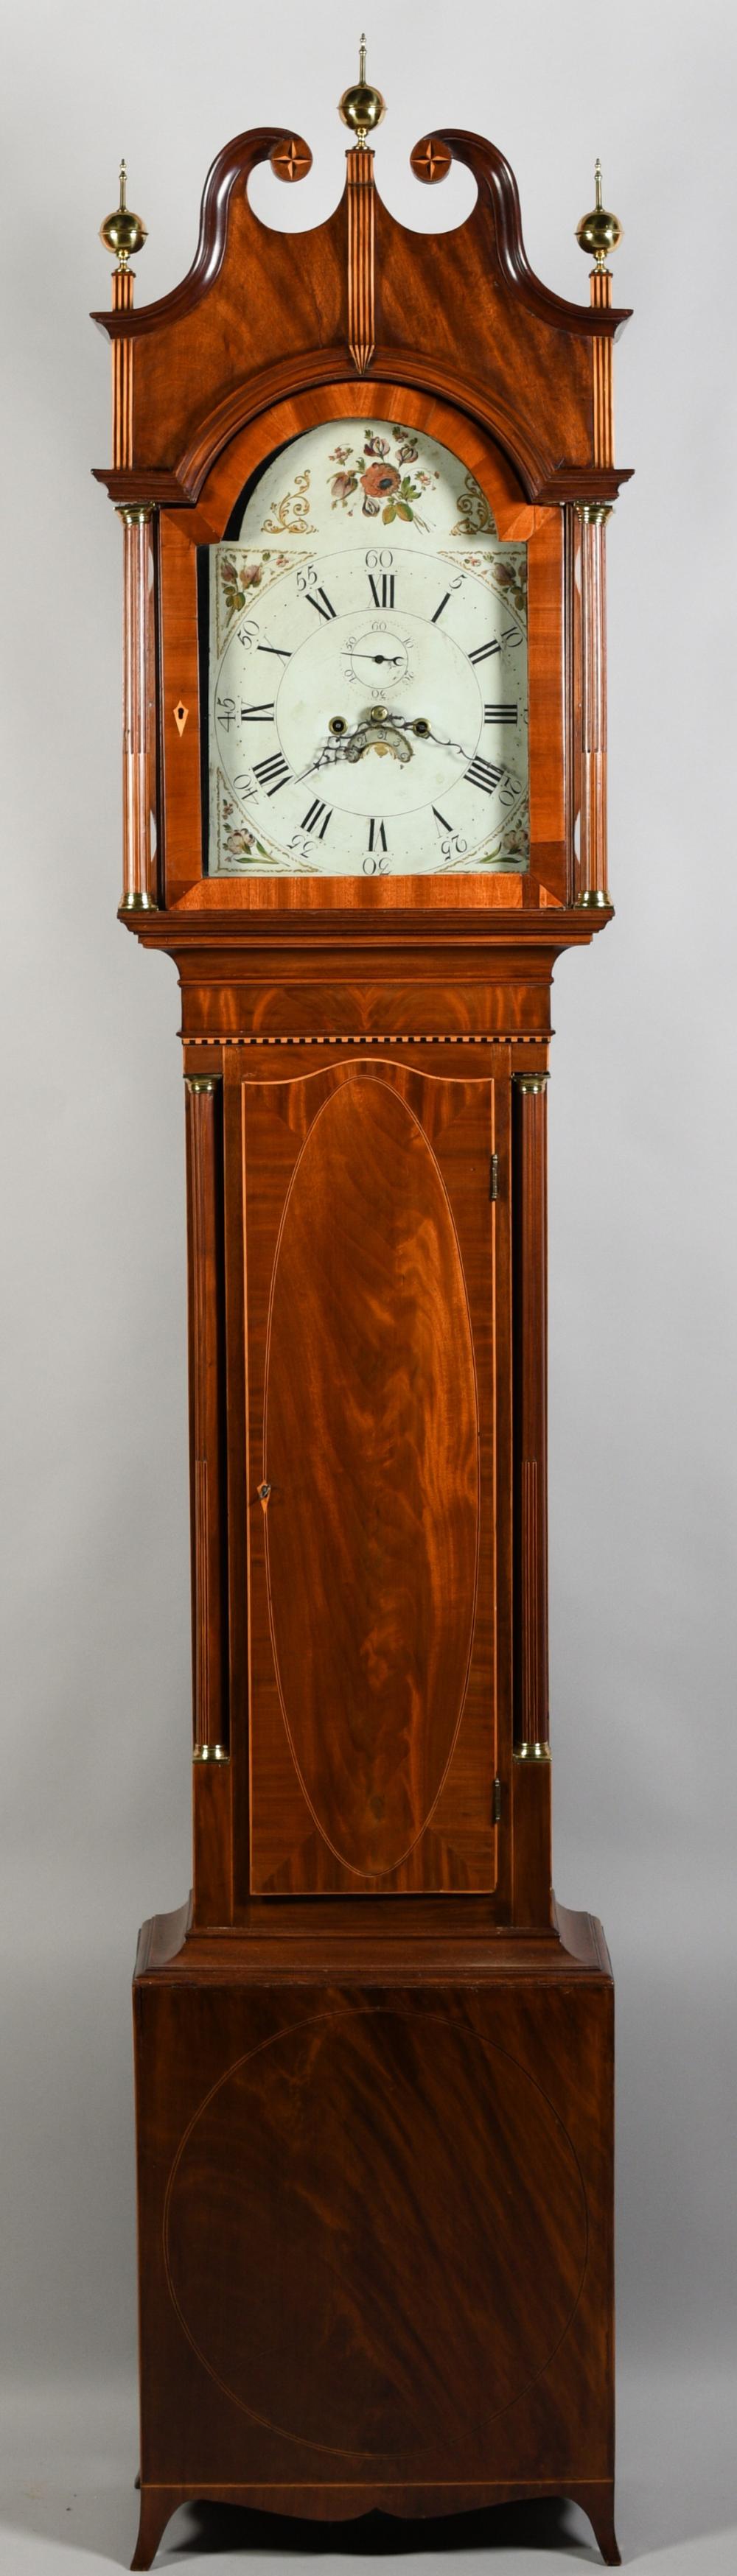 CHIPPENDALE INLAID MAHOGANY TALL 33c73a